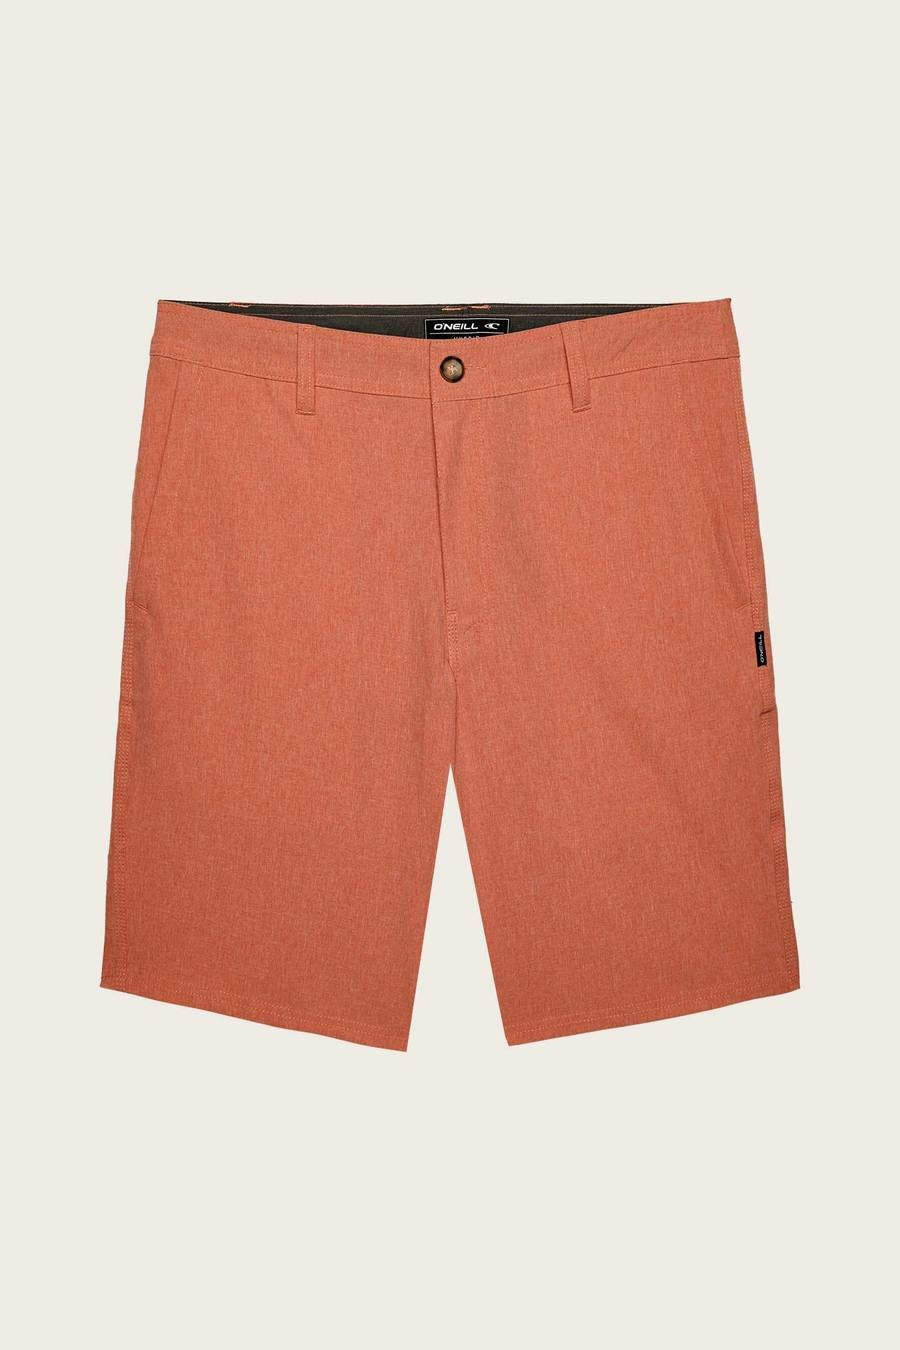 O'neill Men's Shorts 19" Outseam Stretch Heather